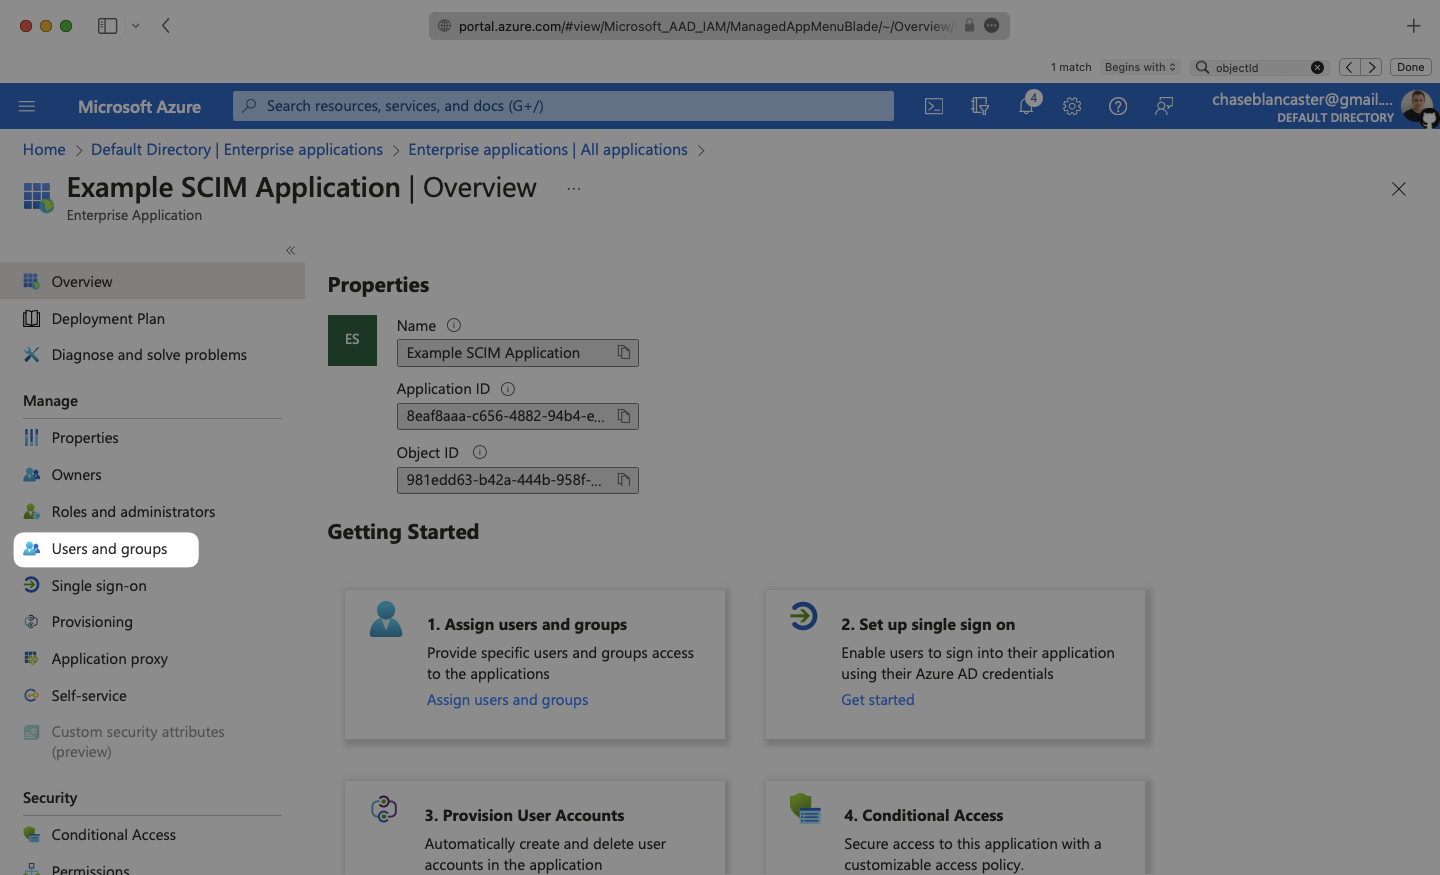 A screenshot showing where to navigate to "Users and groups" from the "Manage" section in Azure.